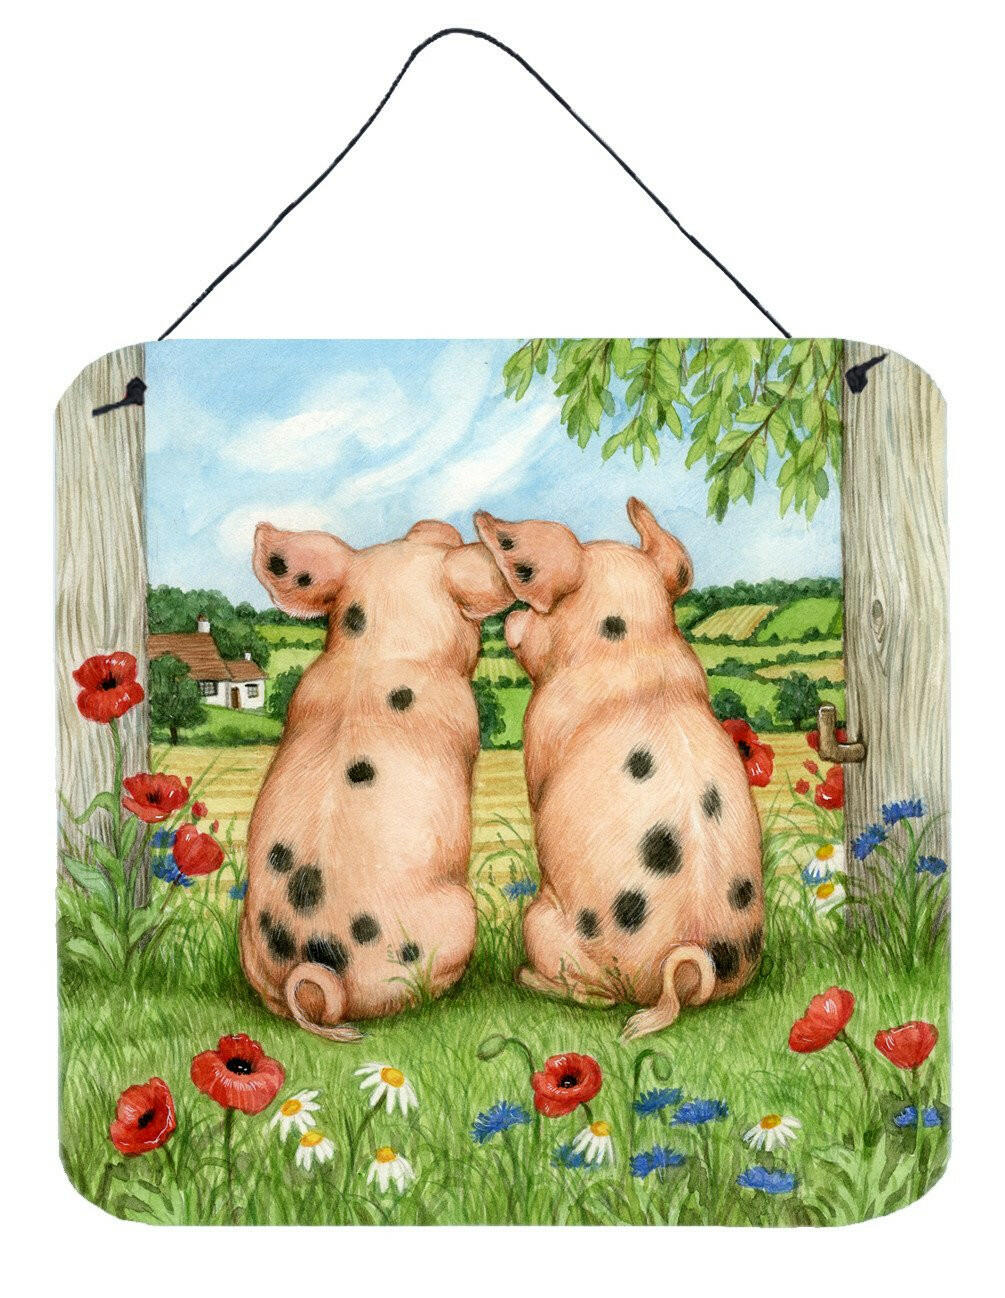 Pigs Side By Side by Debbie Cook Wall or Door Hanging Prints CDCO0354DS66 by Caroline's Treasures